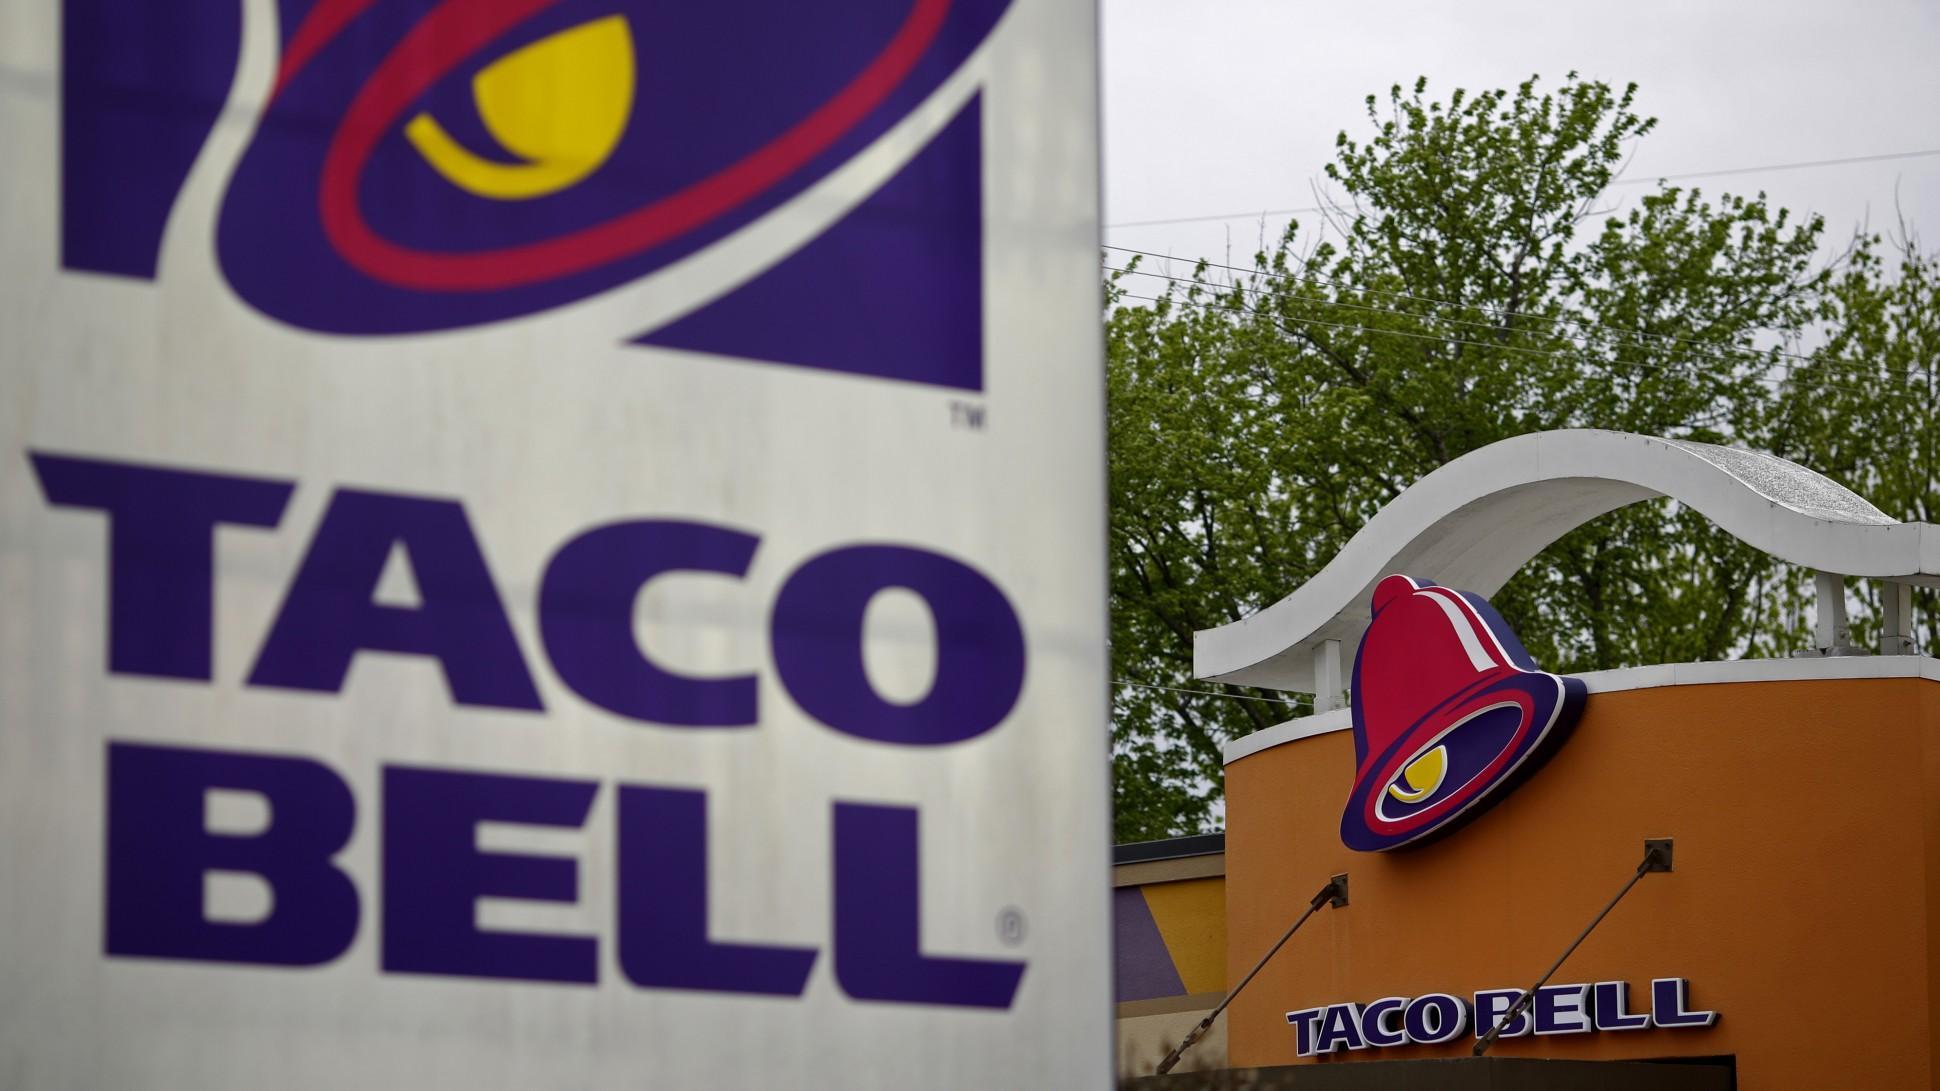 Pizza Hut Taco Bell Logo - KFC, Pizza Hut Still Faring Poorly In China But Not As Poorly